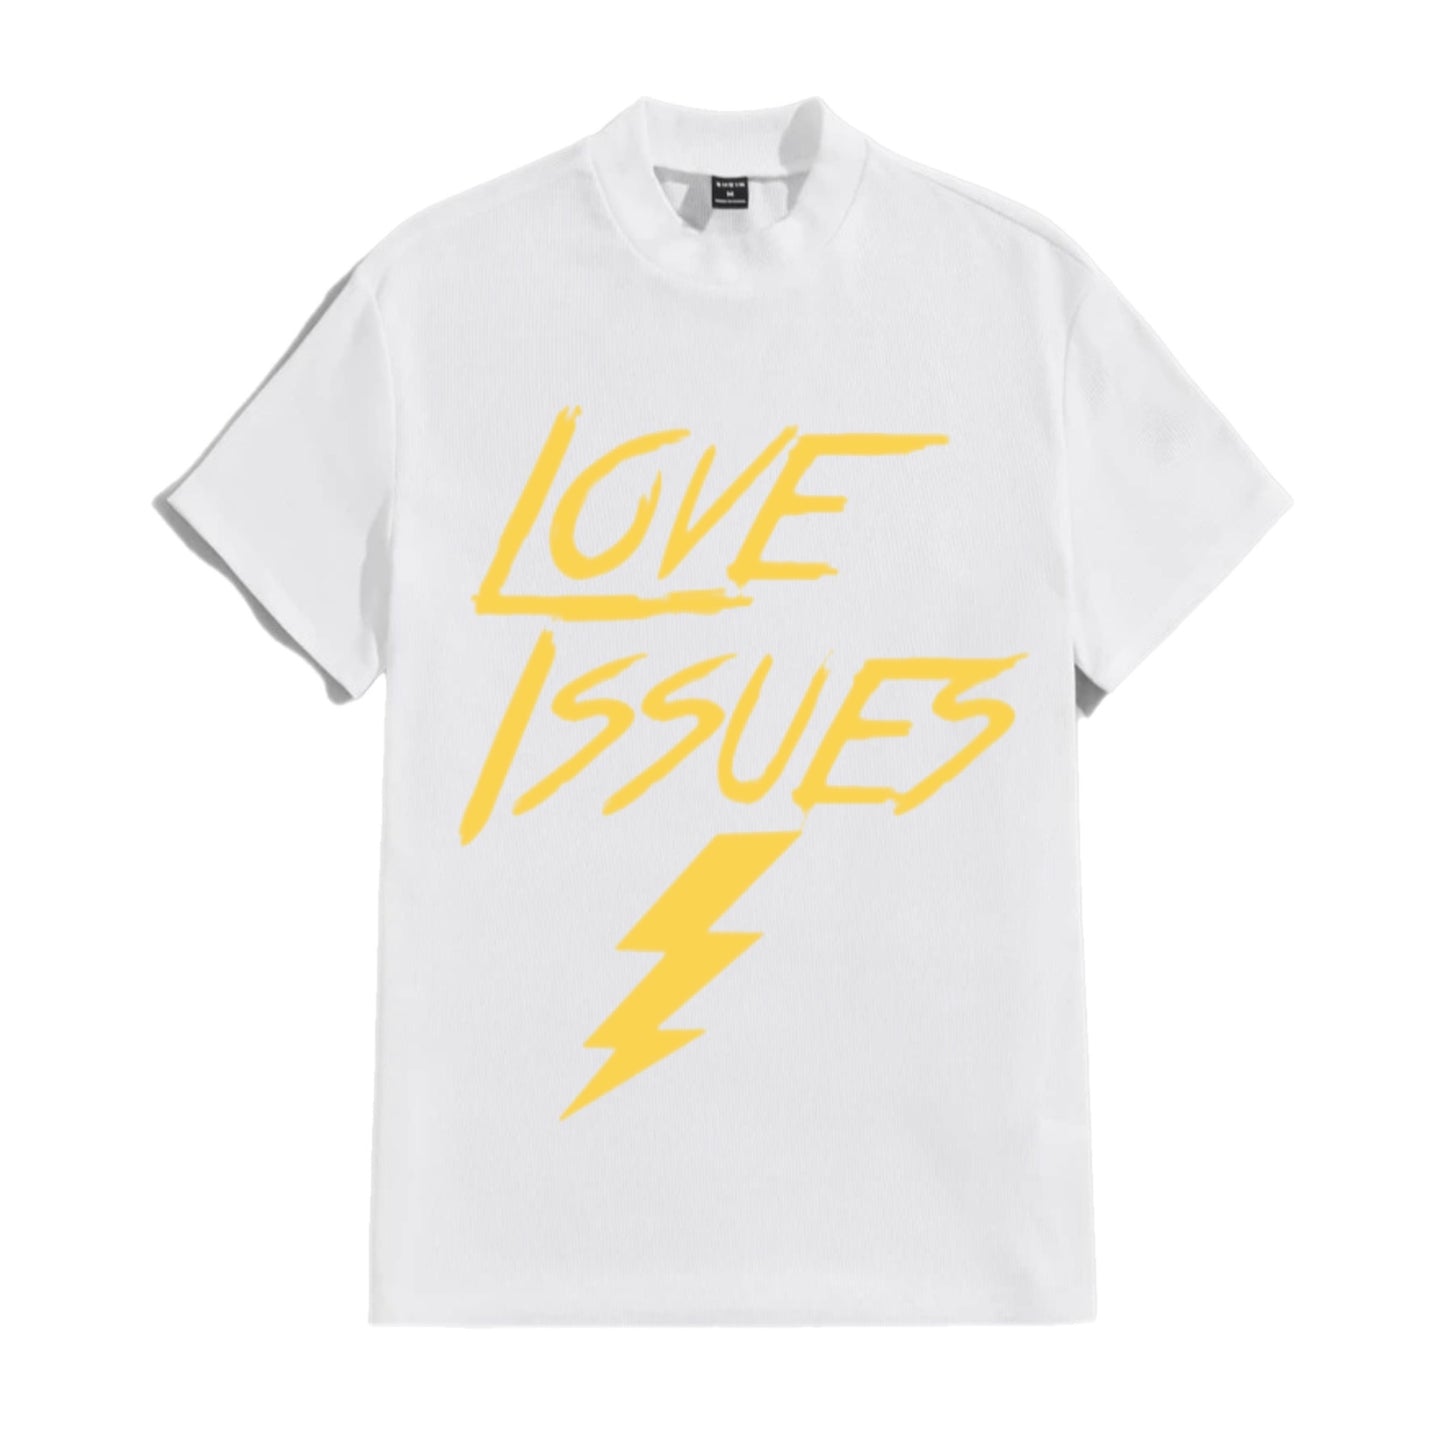 Love issues Tees